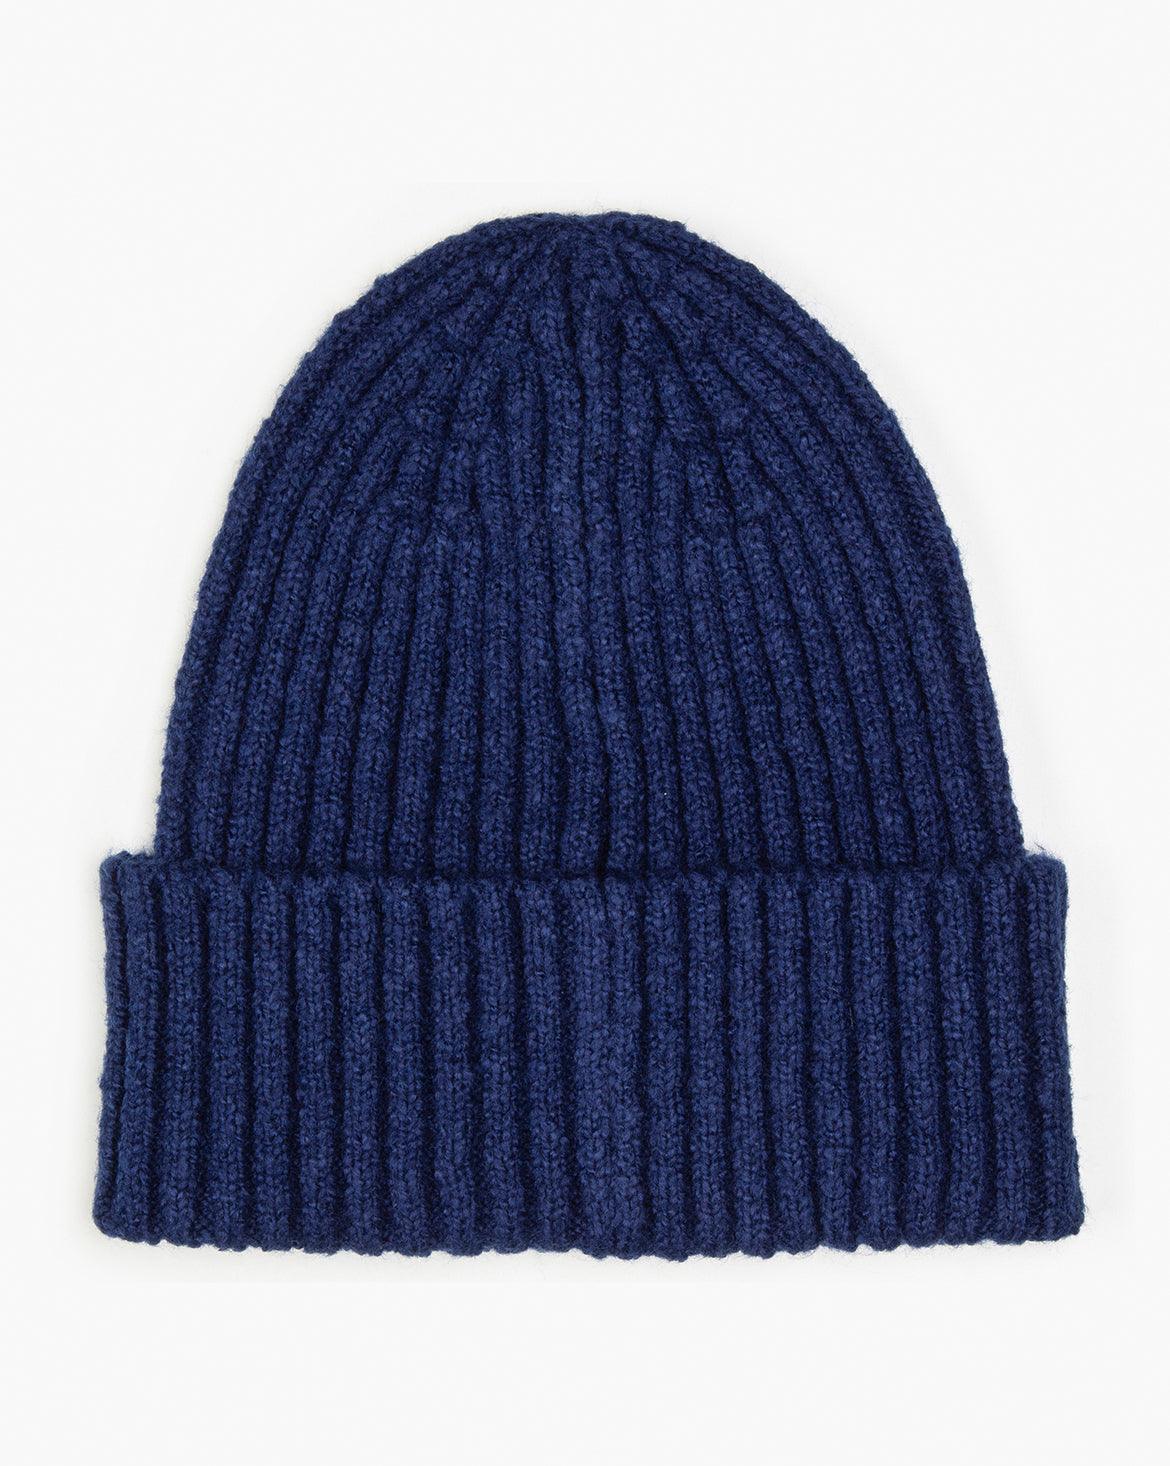 HOLIDAY BATWING BEANIE - NAVY BLUE